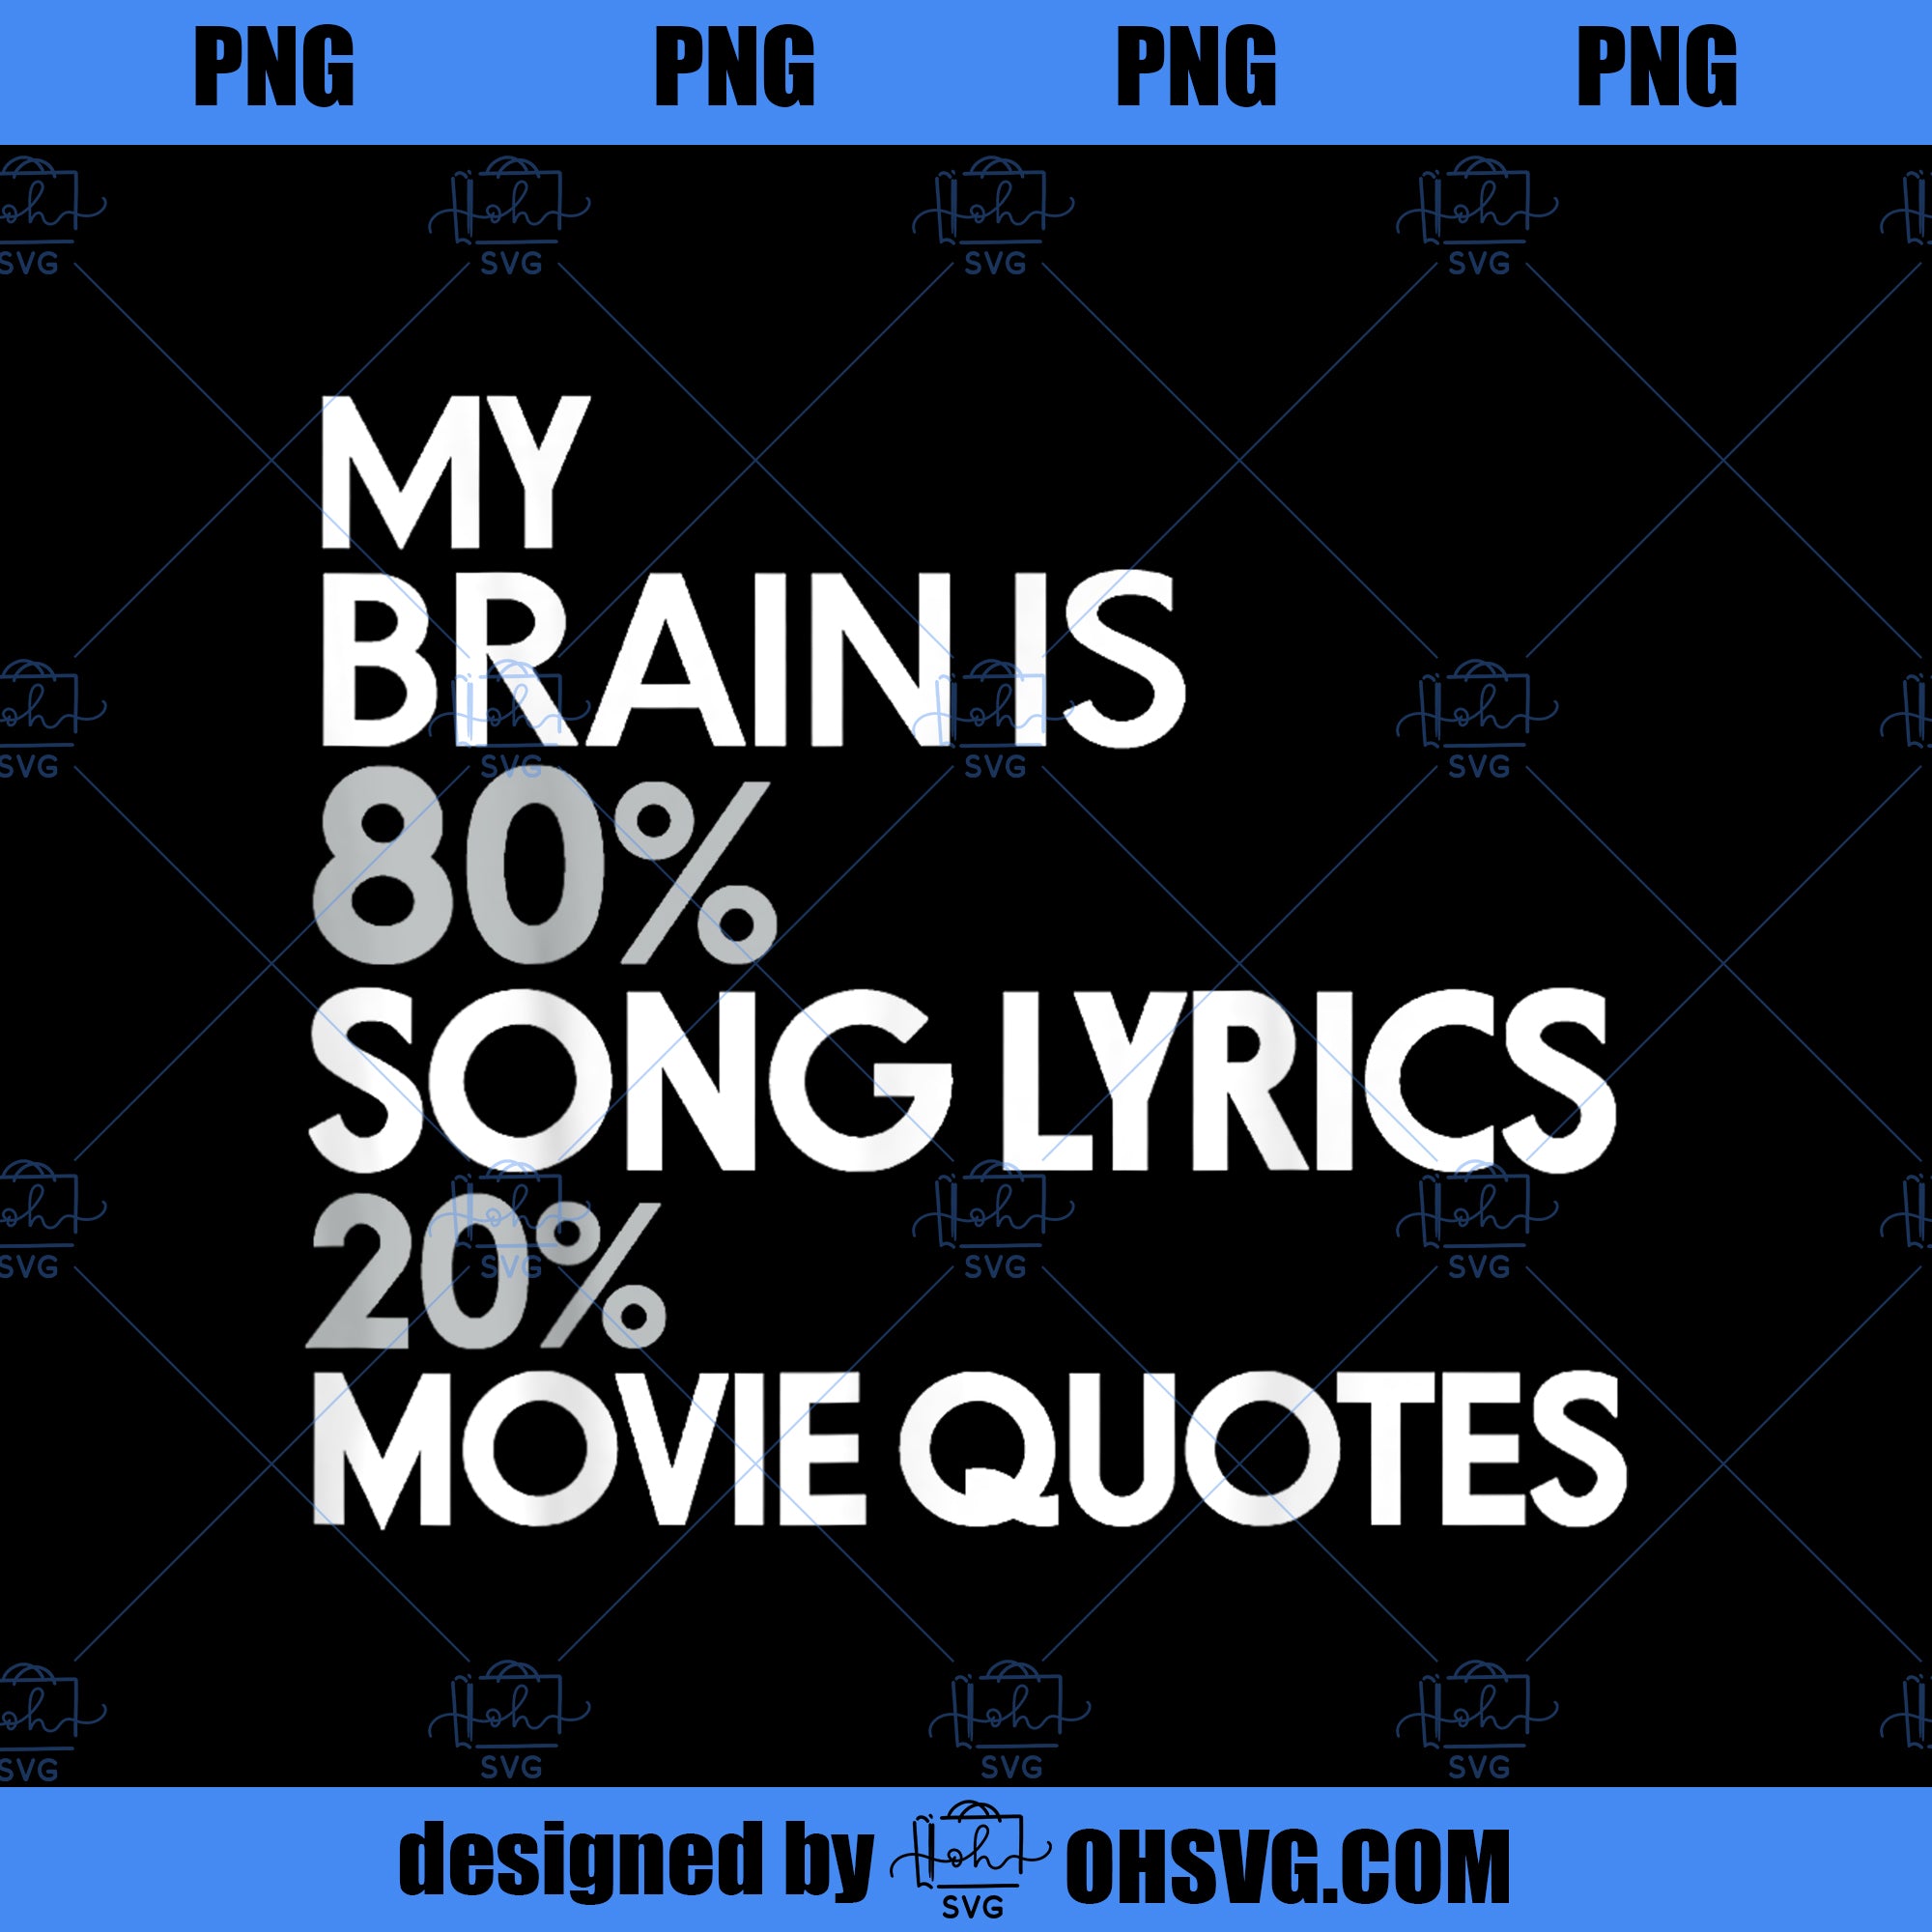 My Brain is 80 Song Lyrics 20 Movie Quotes Funny PNG, Movies PNG, My Brain PNG